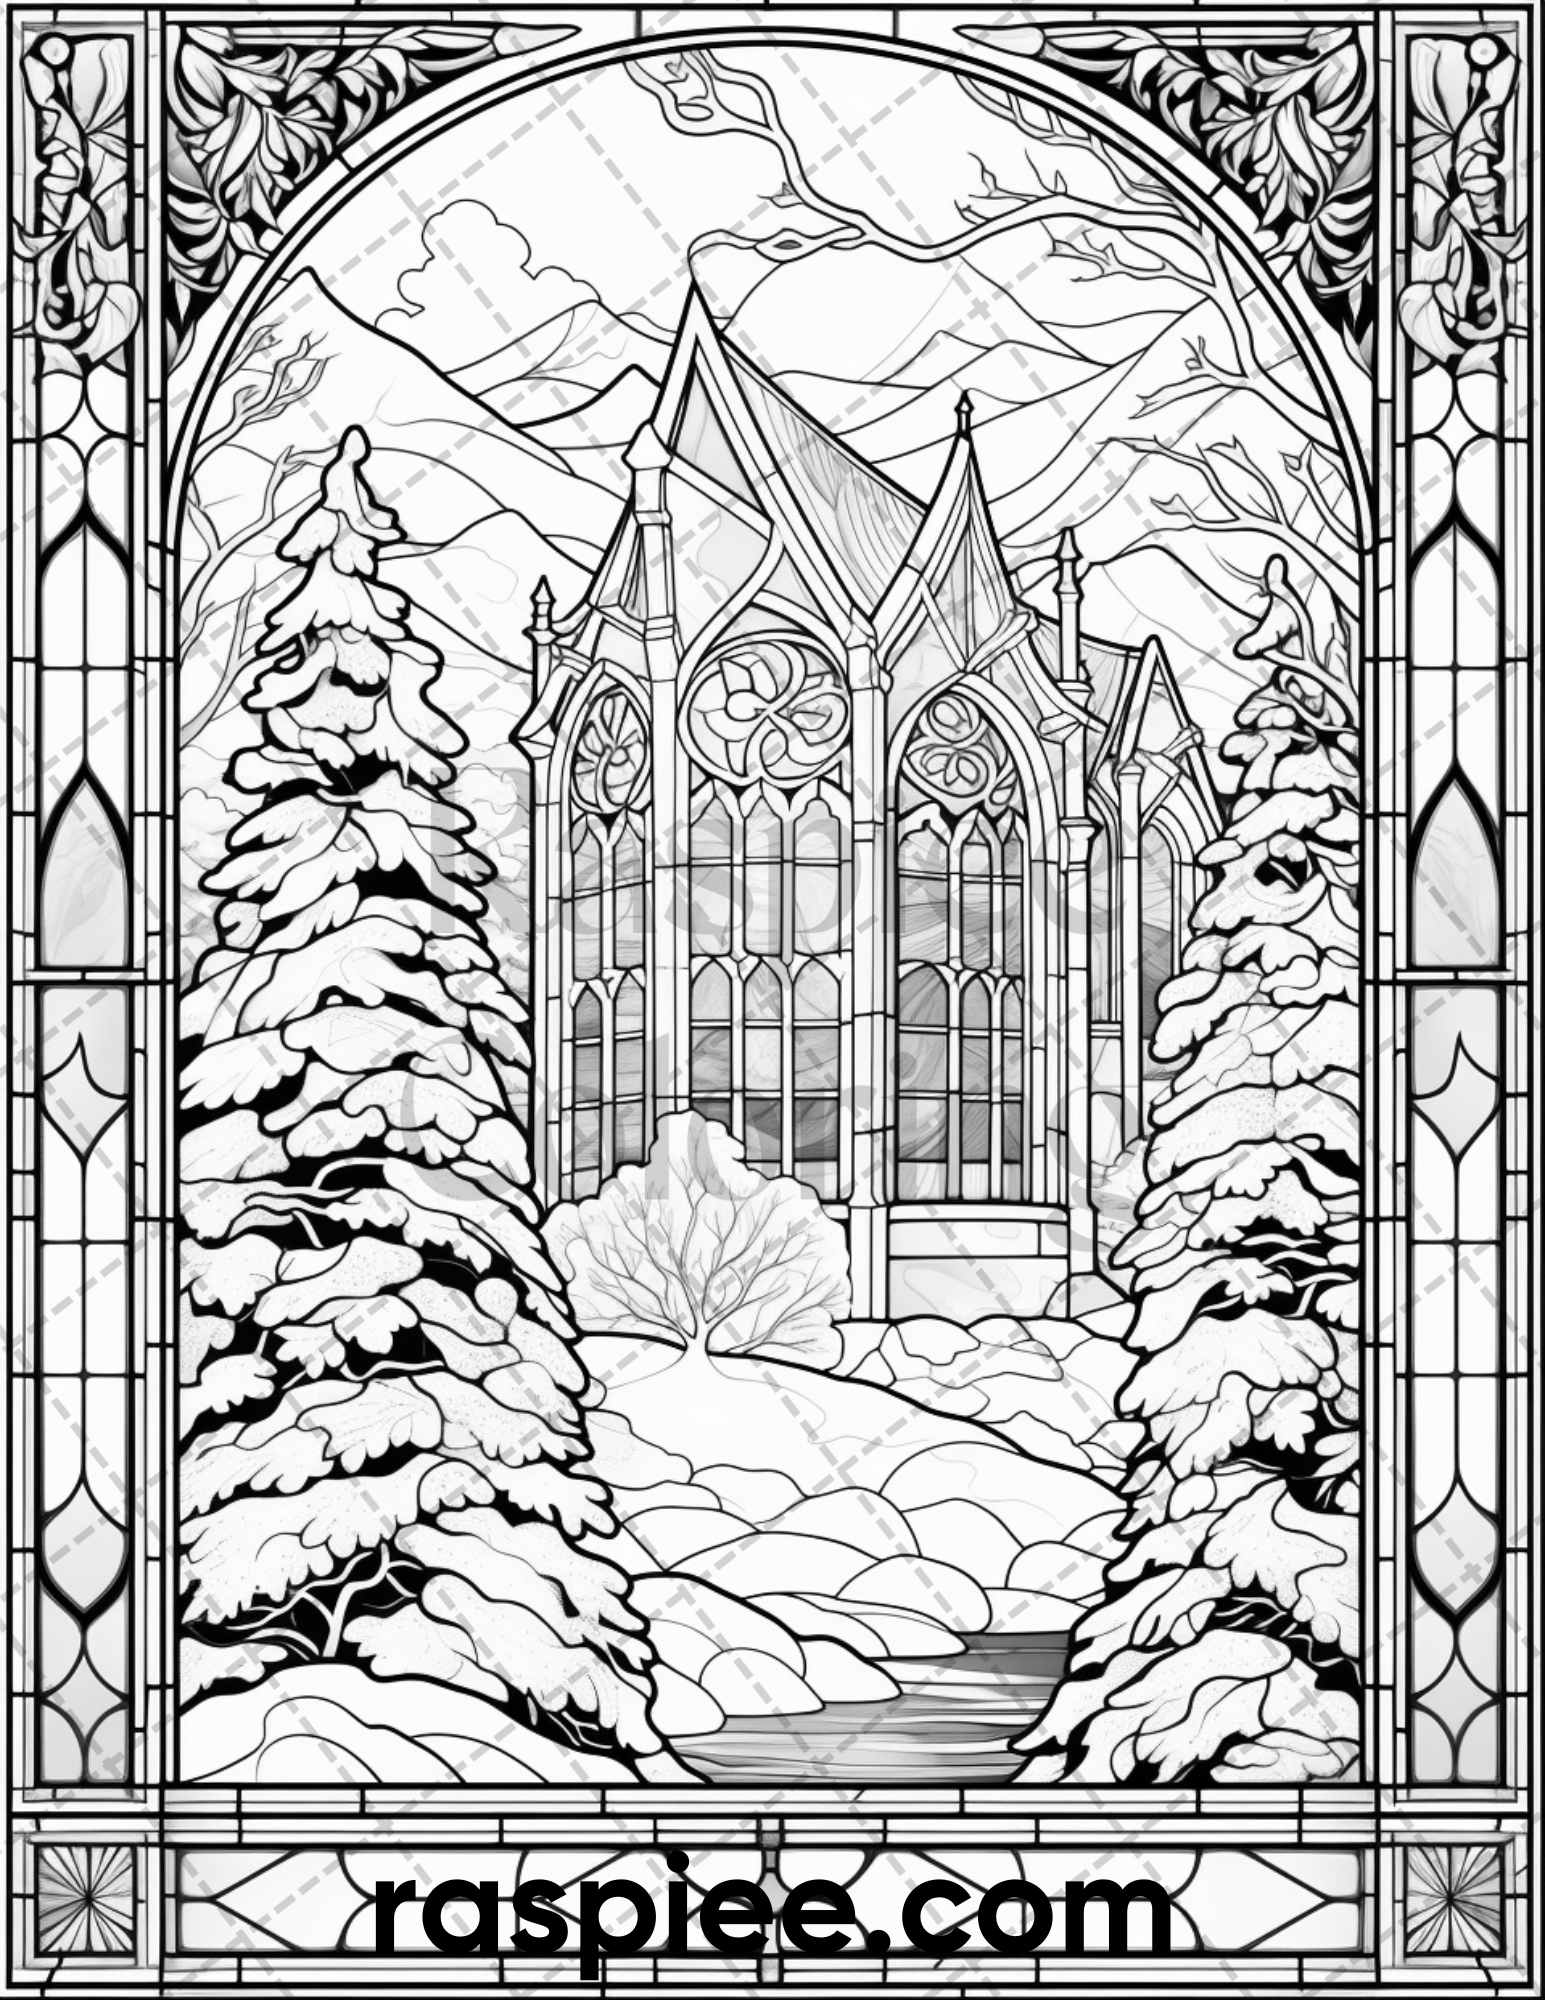 Christmas stained glass coloring page, Adult holiday coloring book, Christmas Coloring Book Printable, Christmas Coloring Pages for Adults, Xmas Coloring Pages, Winter Coloring Pages, Christmas Coloring Sheets